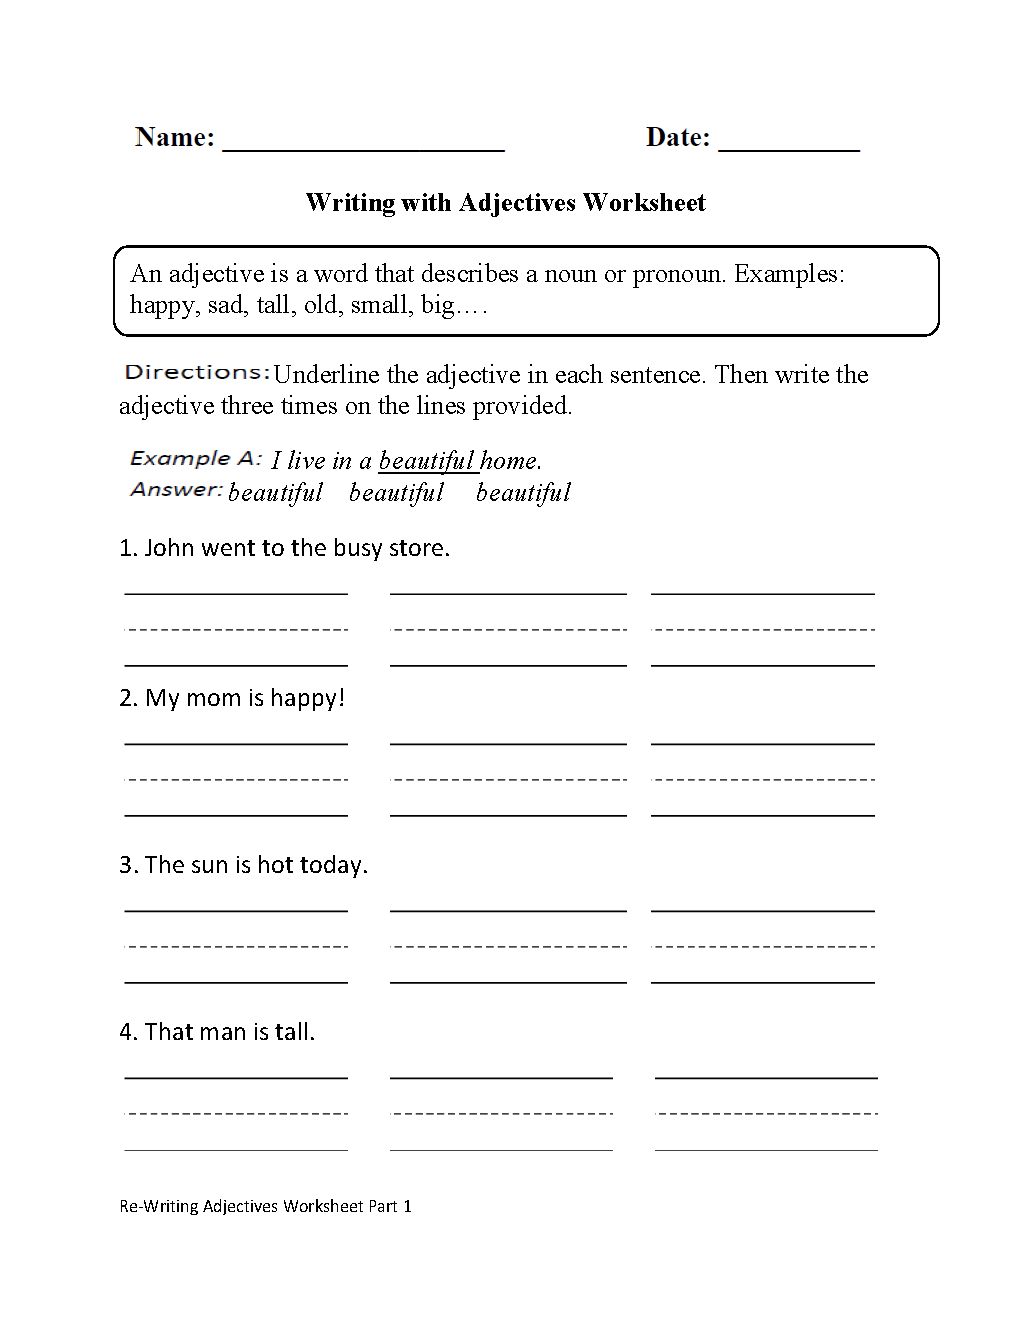 Adjectives for Fifth Grade Writing Worksheets Image